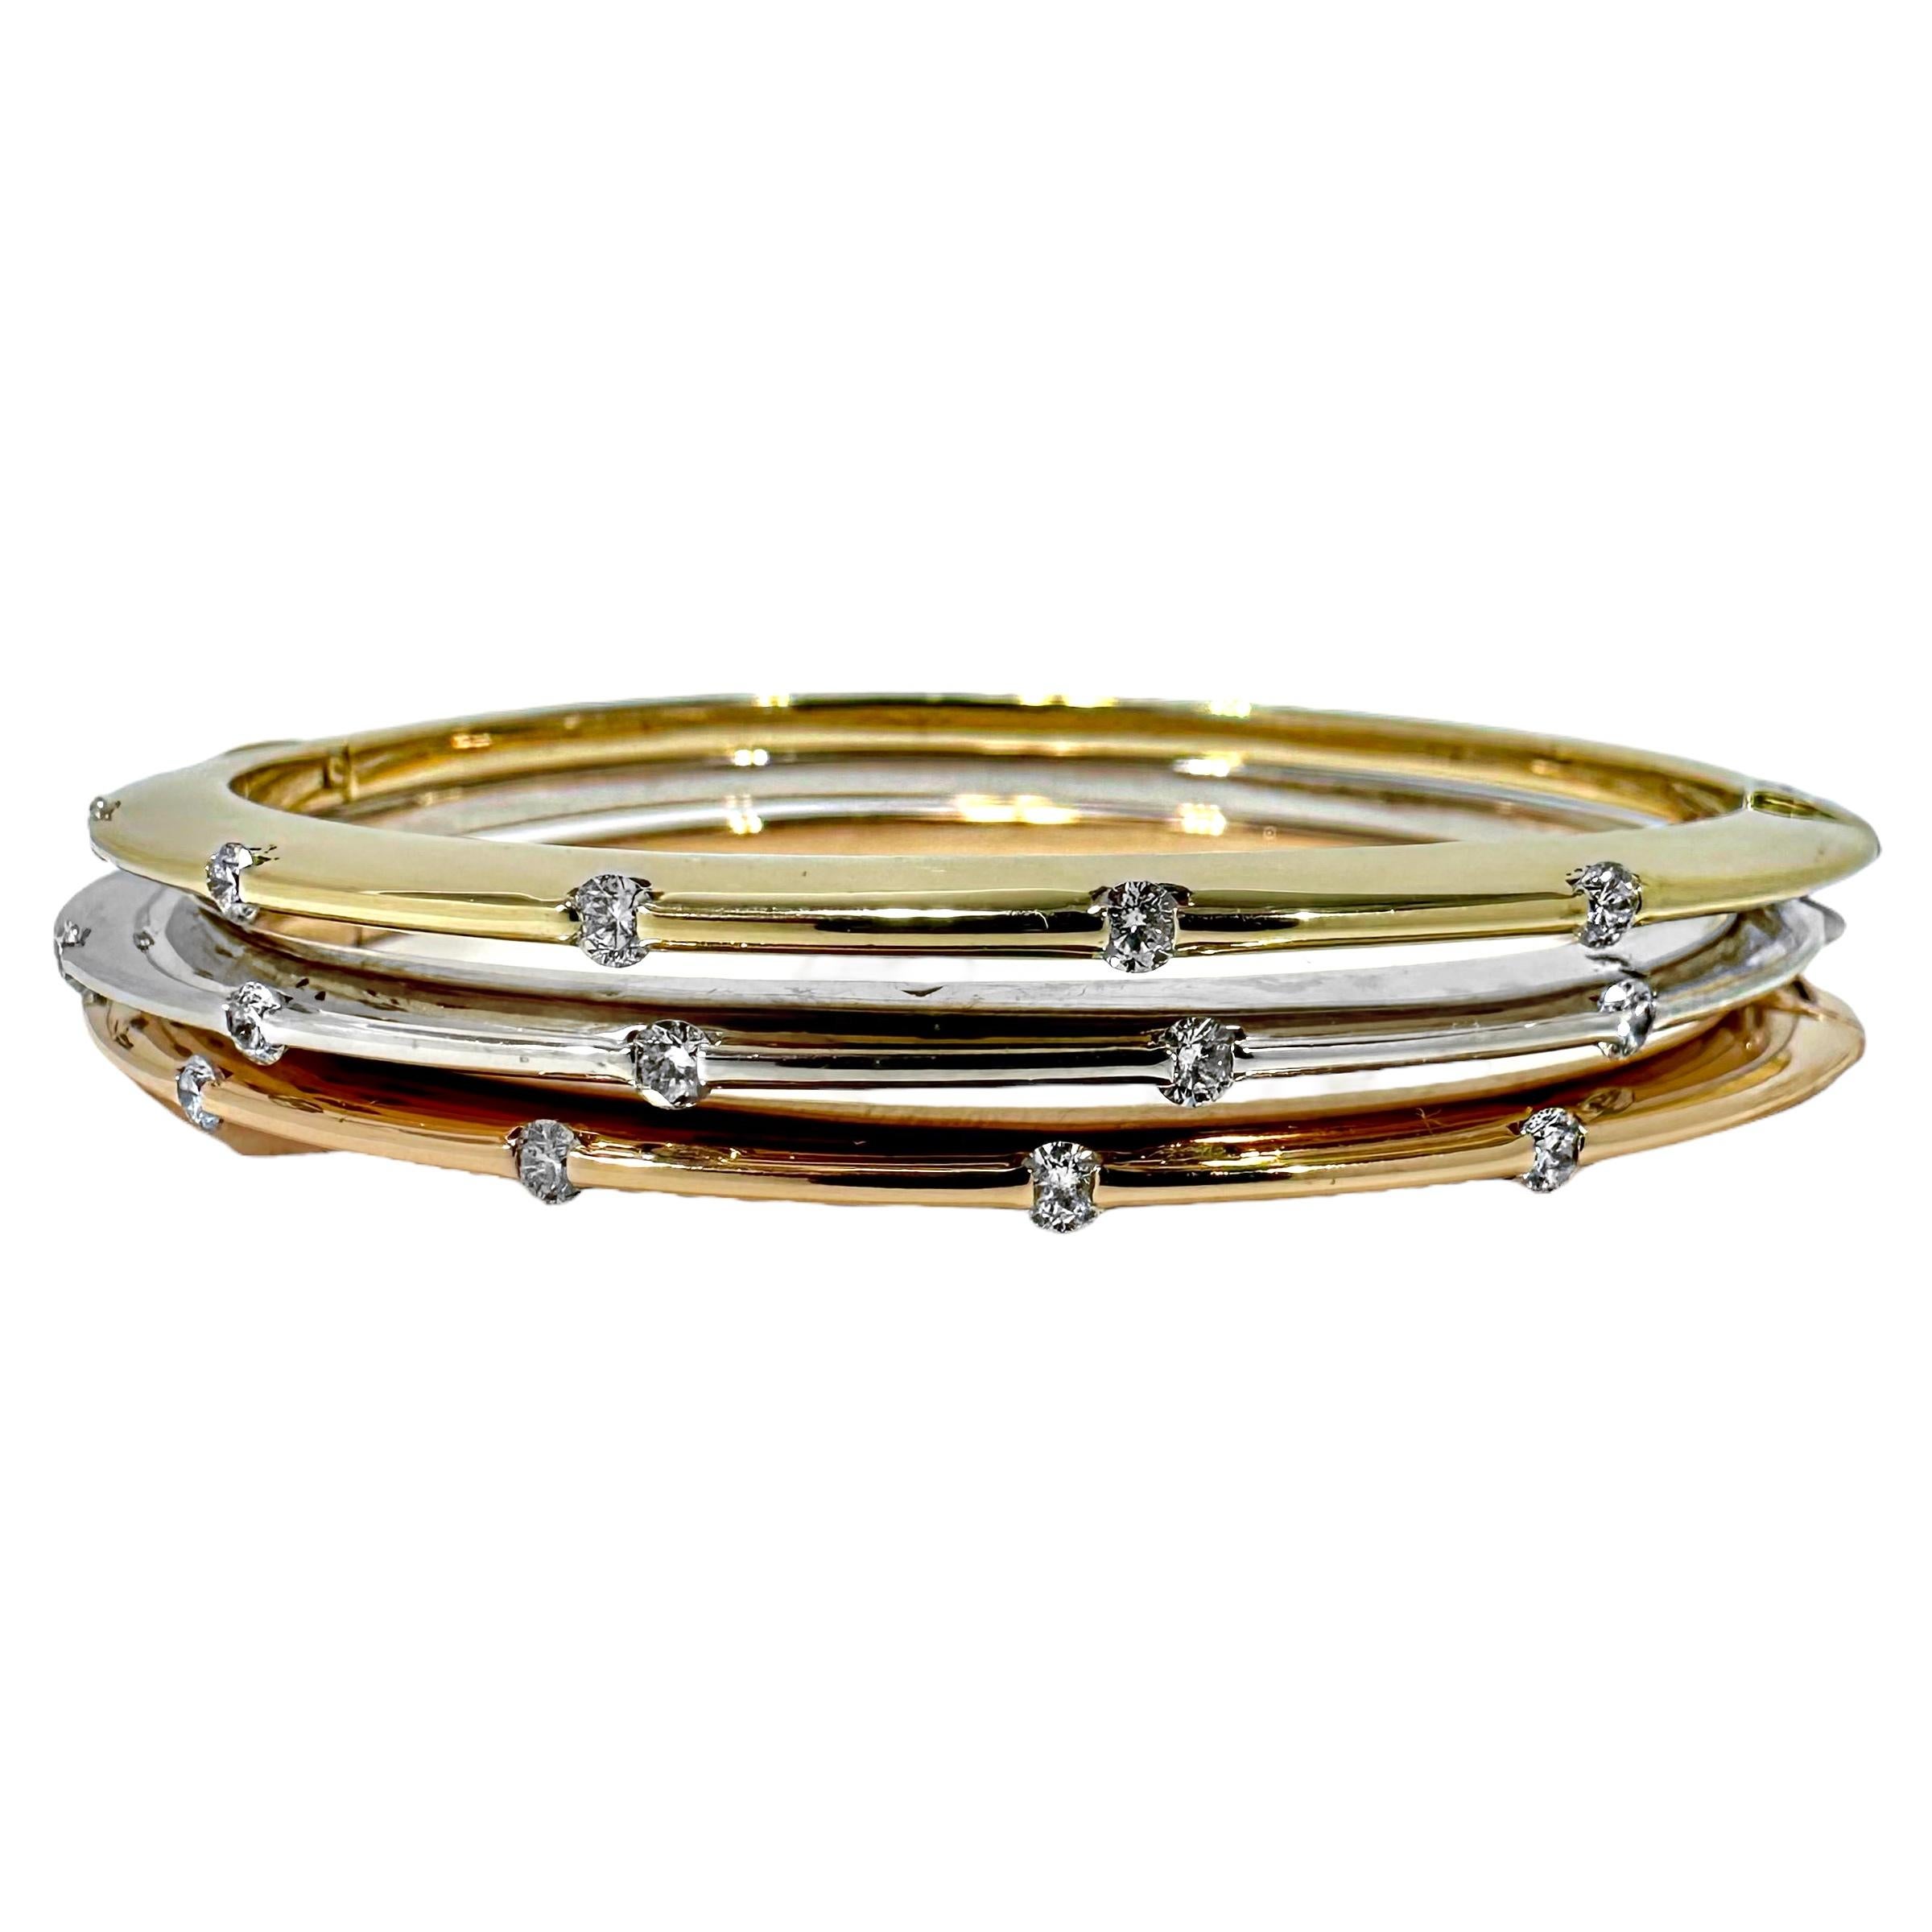 This exceedingly stylish and well crafted three piece set of Italian, 14k yellow, white and rose gold, hinged bangle bracelets are Gem-loc style, set with a total of fifteen modern round brilliant cut diamonds. Diamonds have a total approximate